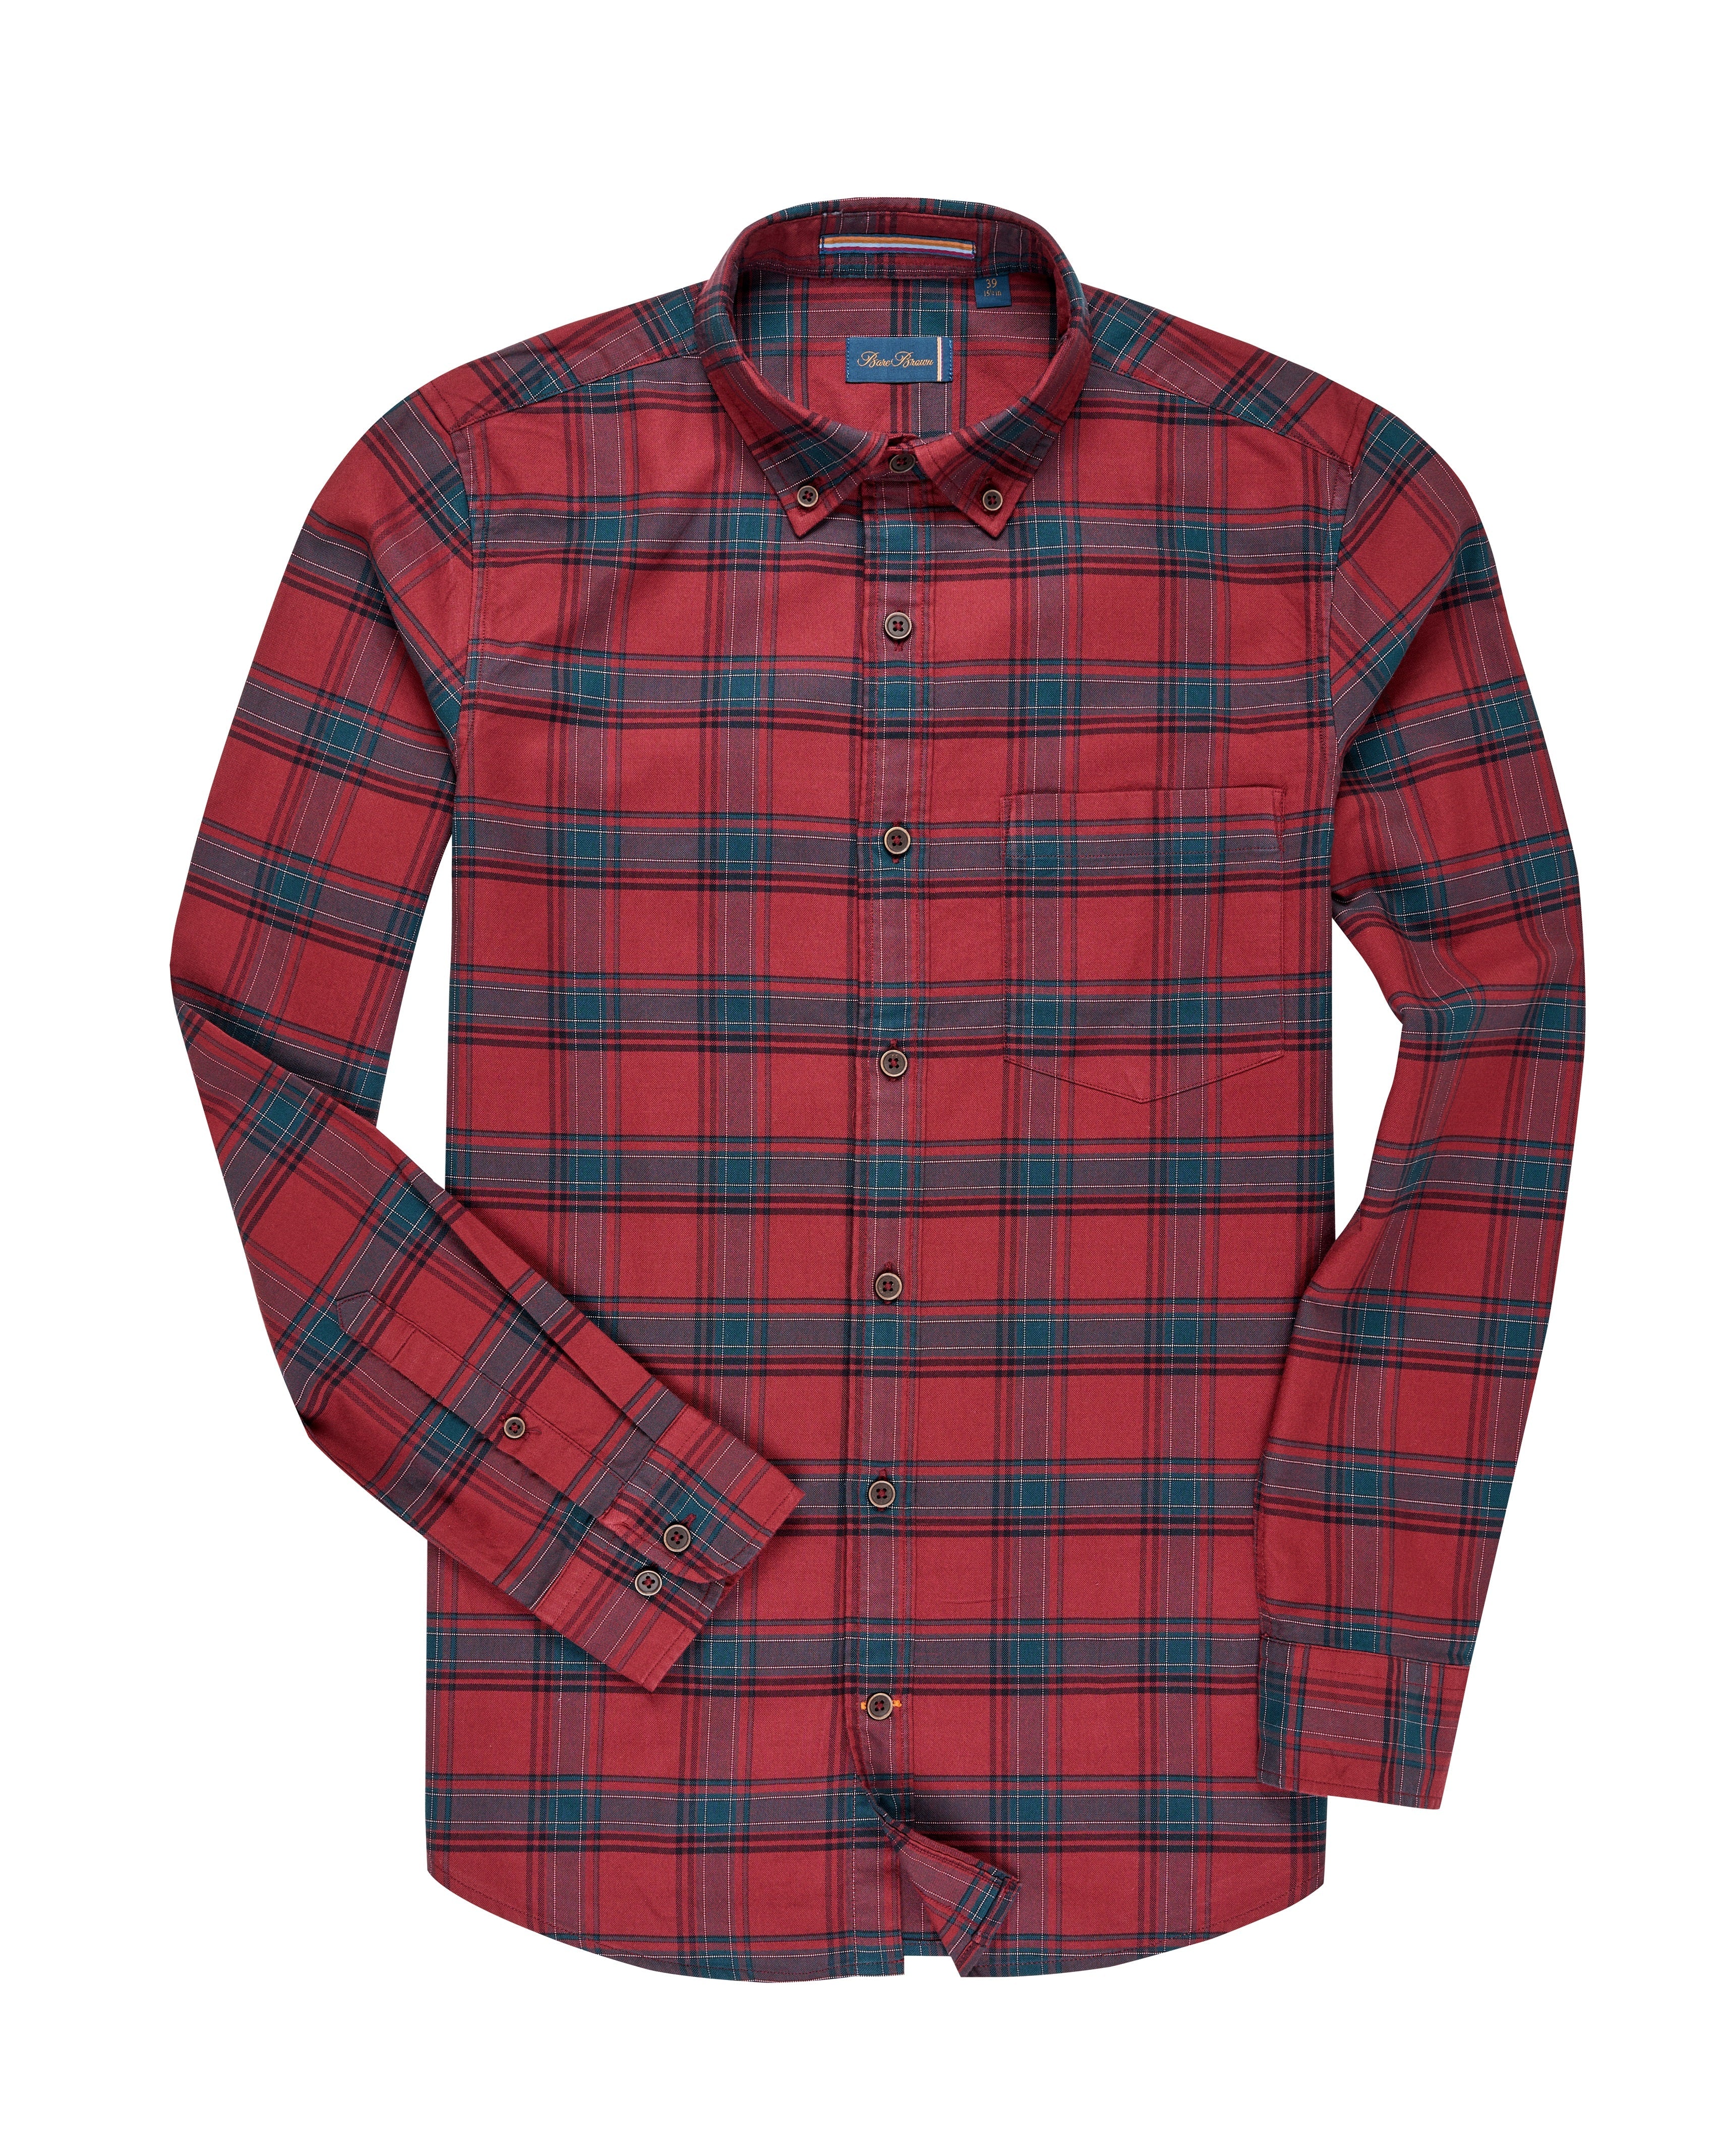 Bare Brown Checkered Cotton Spandex Shirt, Slim Fit with Full Sleeves - Red